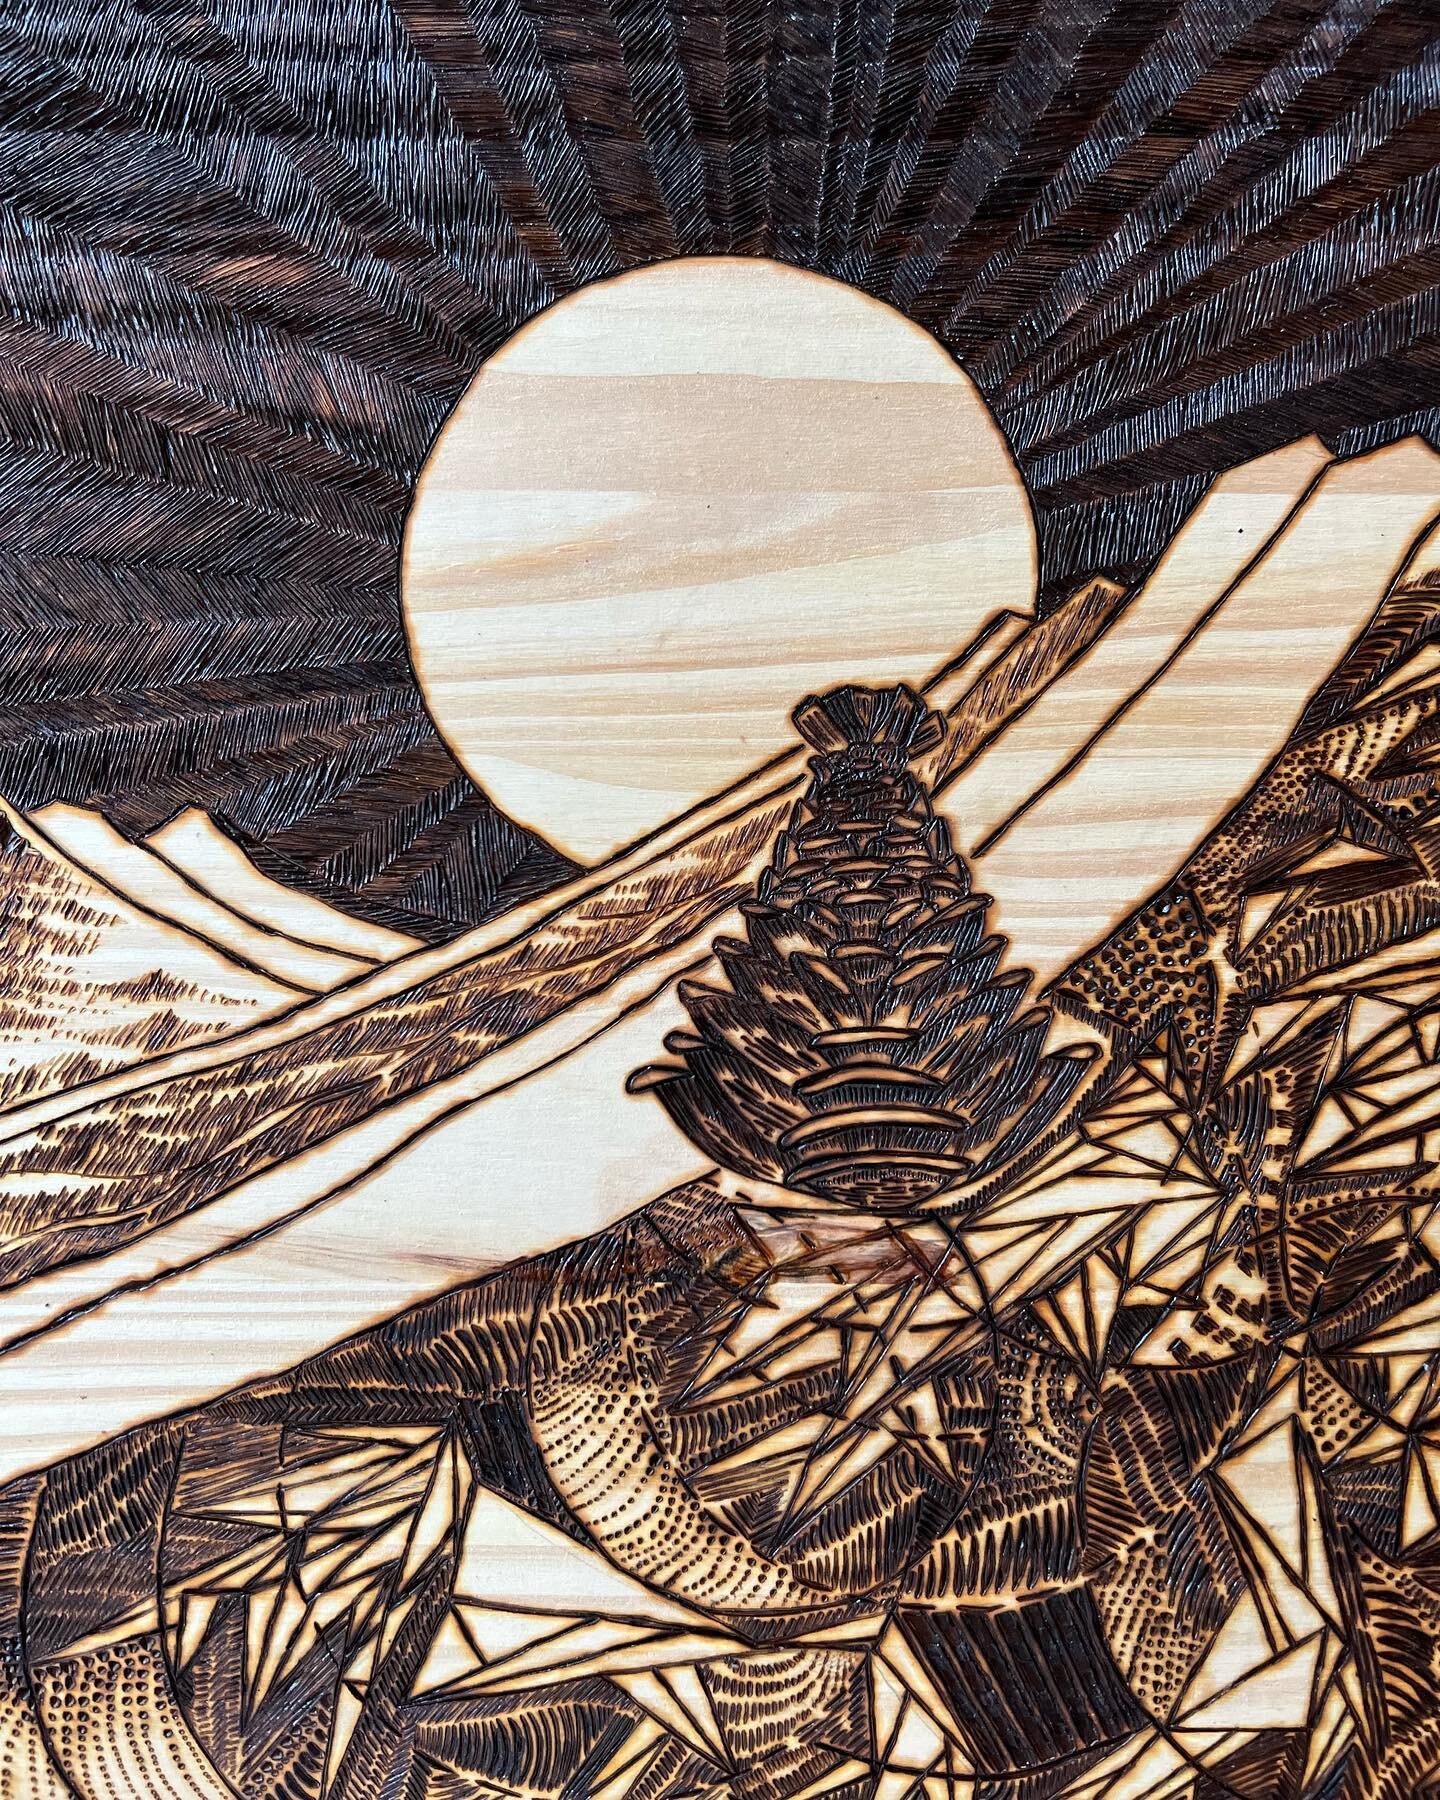 Today&rsquo;s progress✨

Next stop: color station, woo woooo🚂
What are you working on today?

&gt;
&gt;
&gt;
&gt;
&gt;
&gt;
&gt;
&gt;
#thegrizzledmoon #woodburningart #woodburningartist #pyrographyart #pyrographyartist #mountainart #mountainartist #